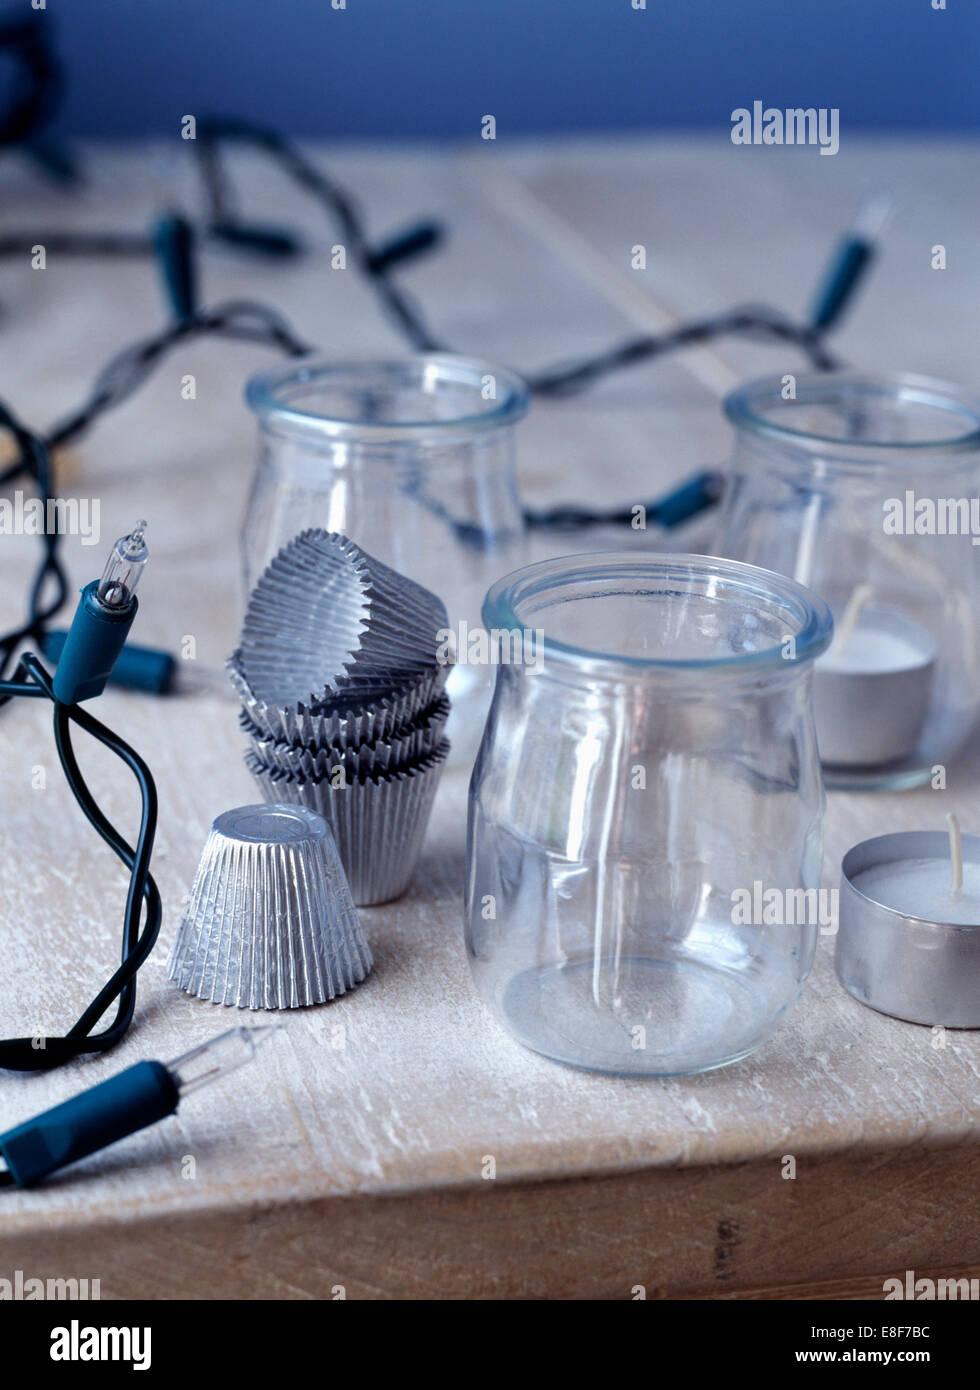 Close-up of Christmas tree lights with small glass jars and corrugated foil cases Stock Photo